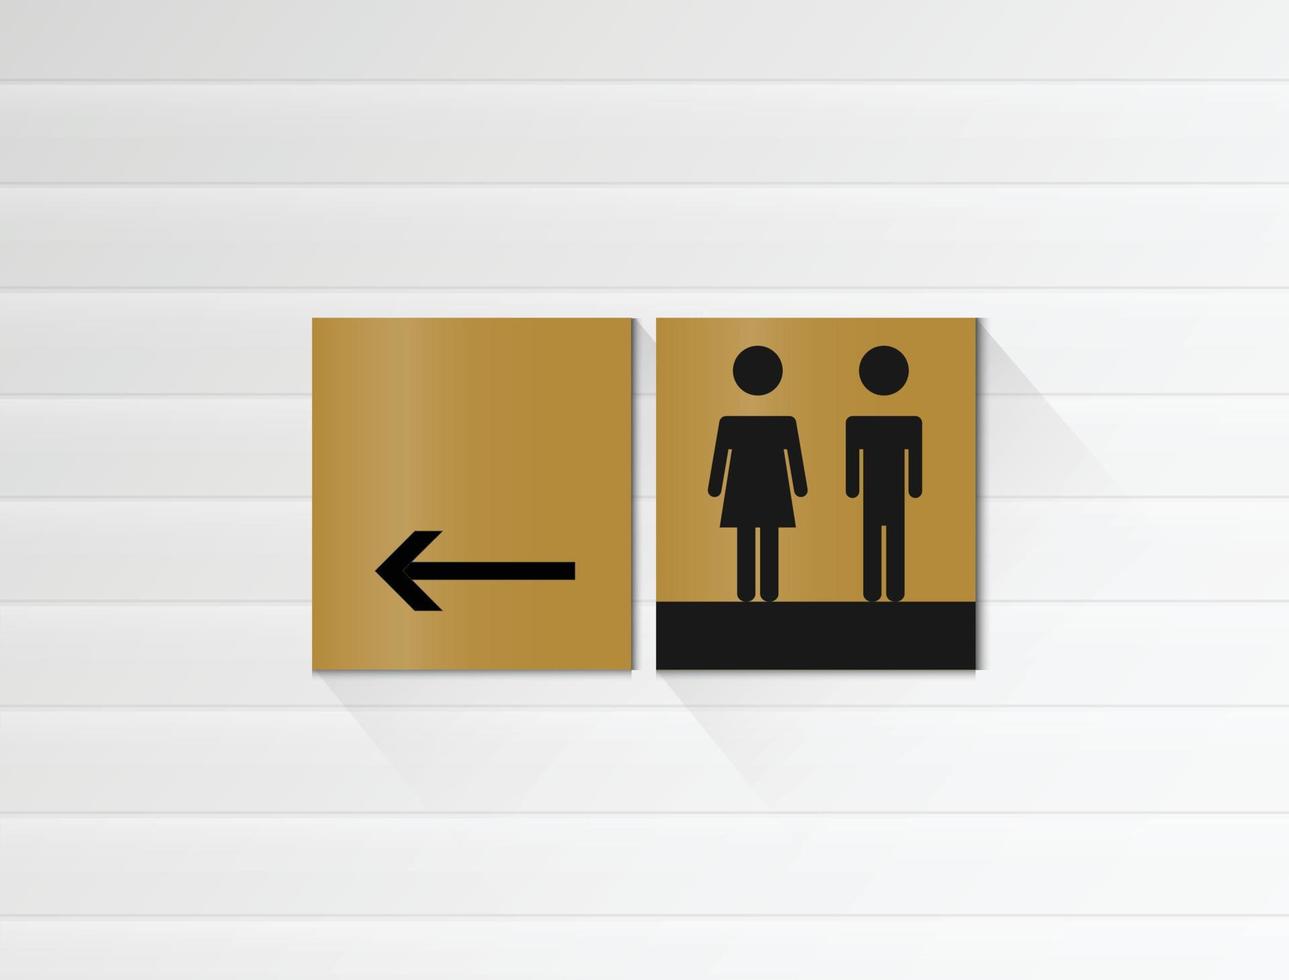 toilet doors white for male and female genders vector